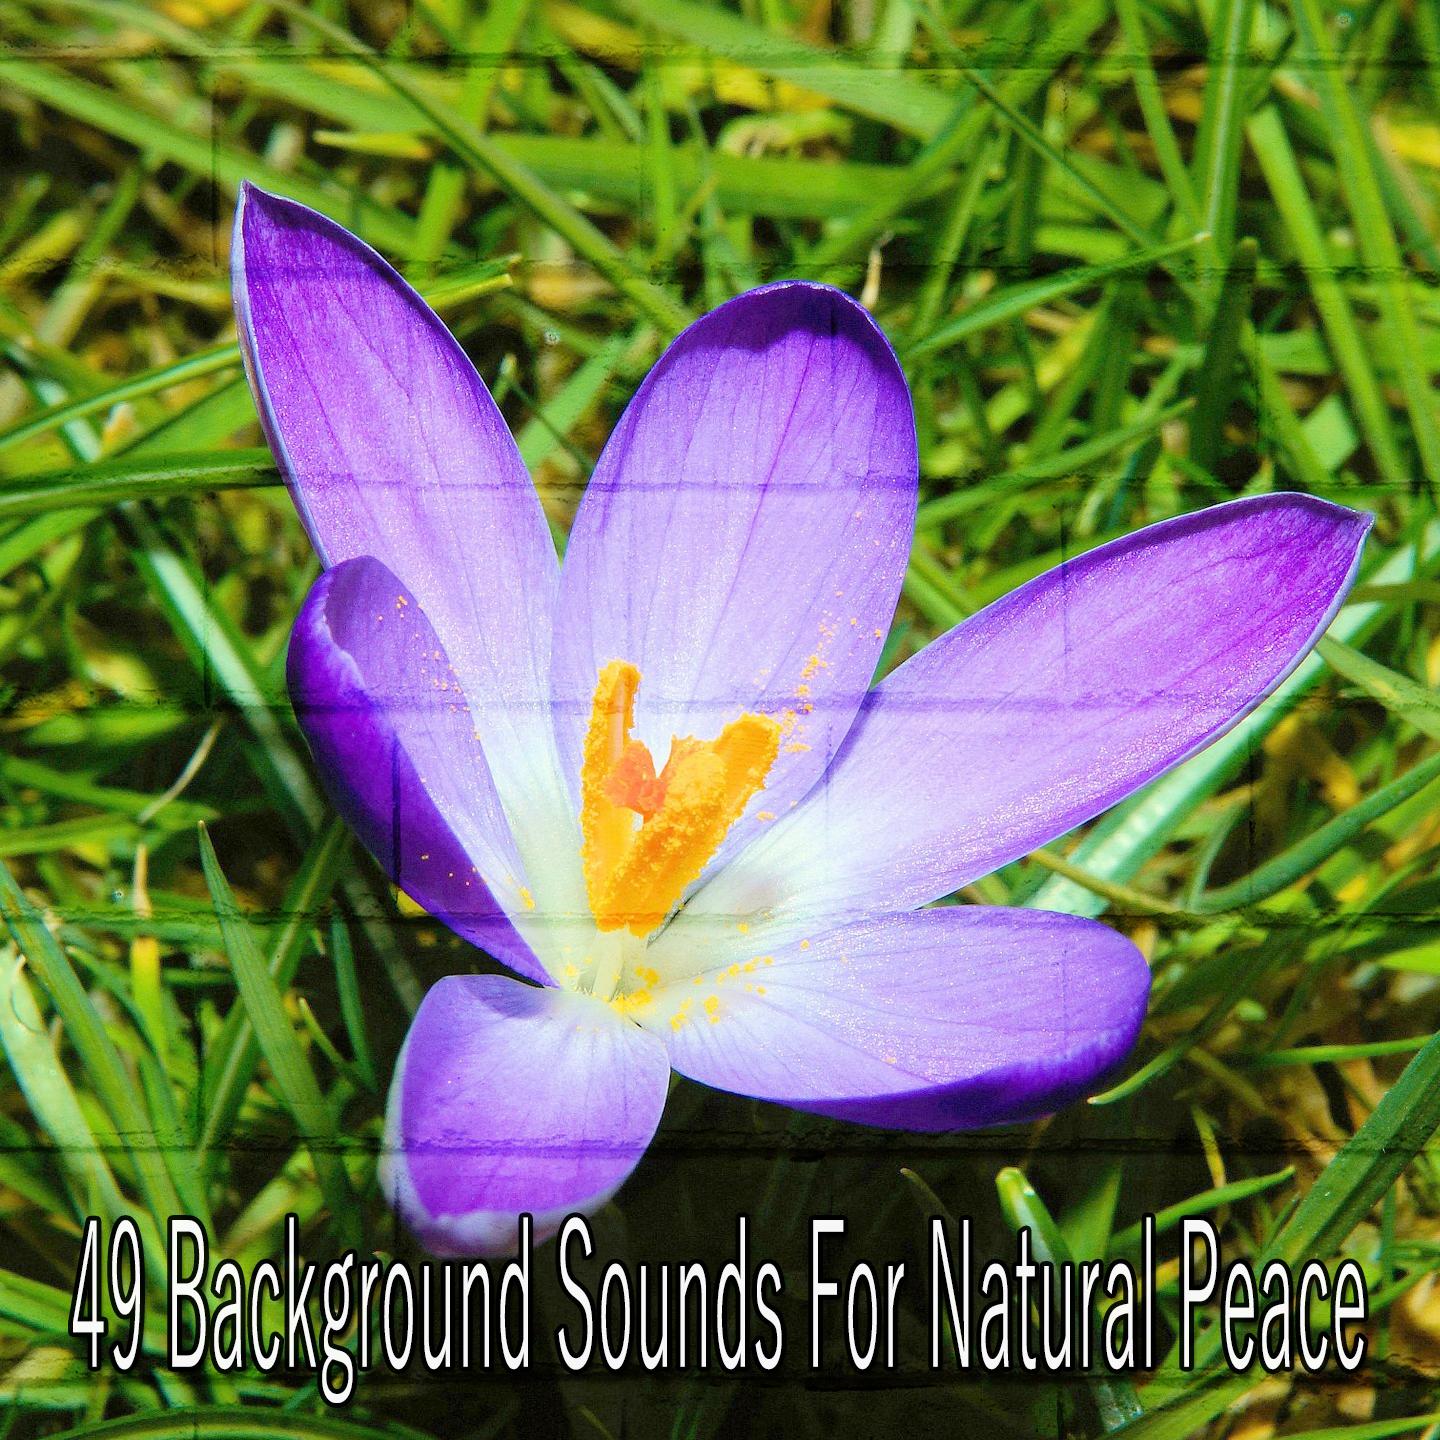 49 Background Sounds for Natural Peace